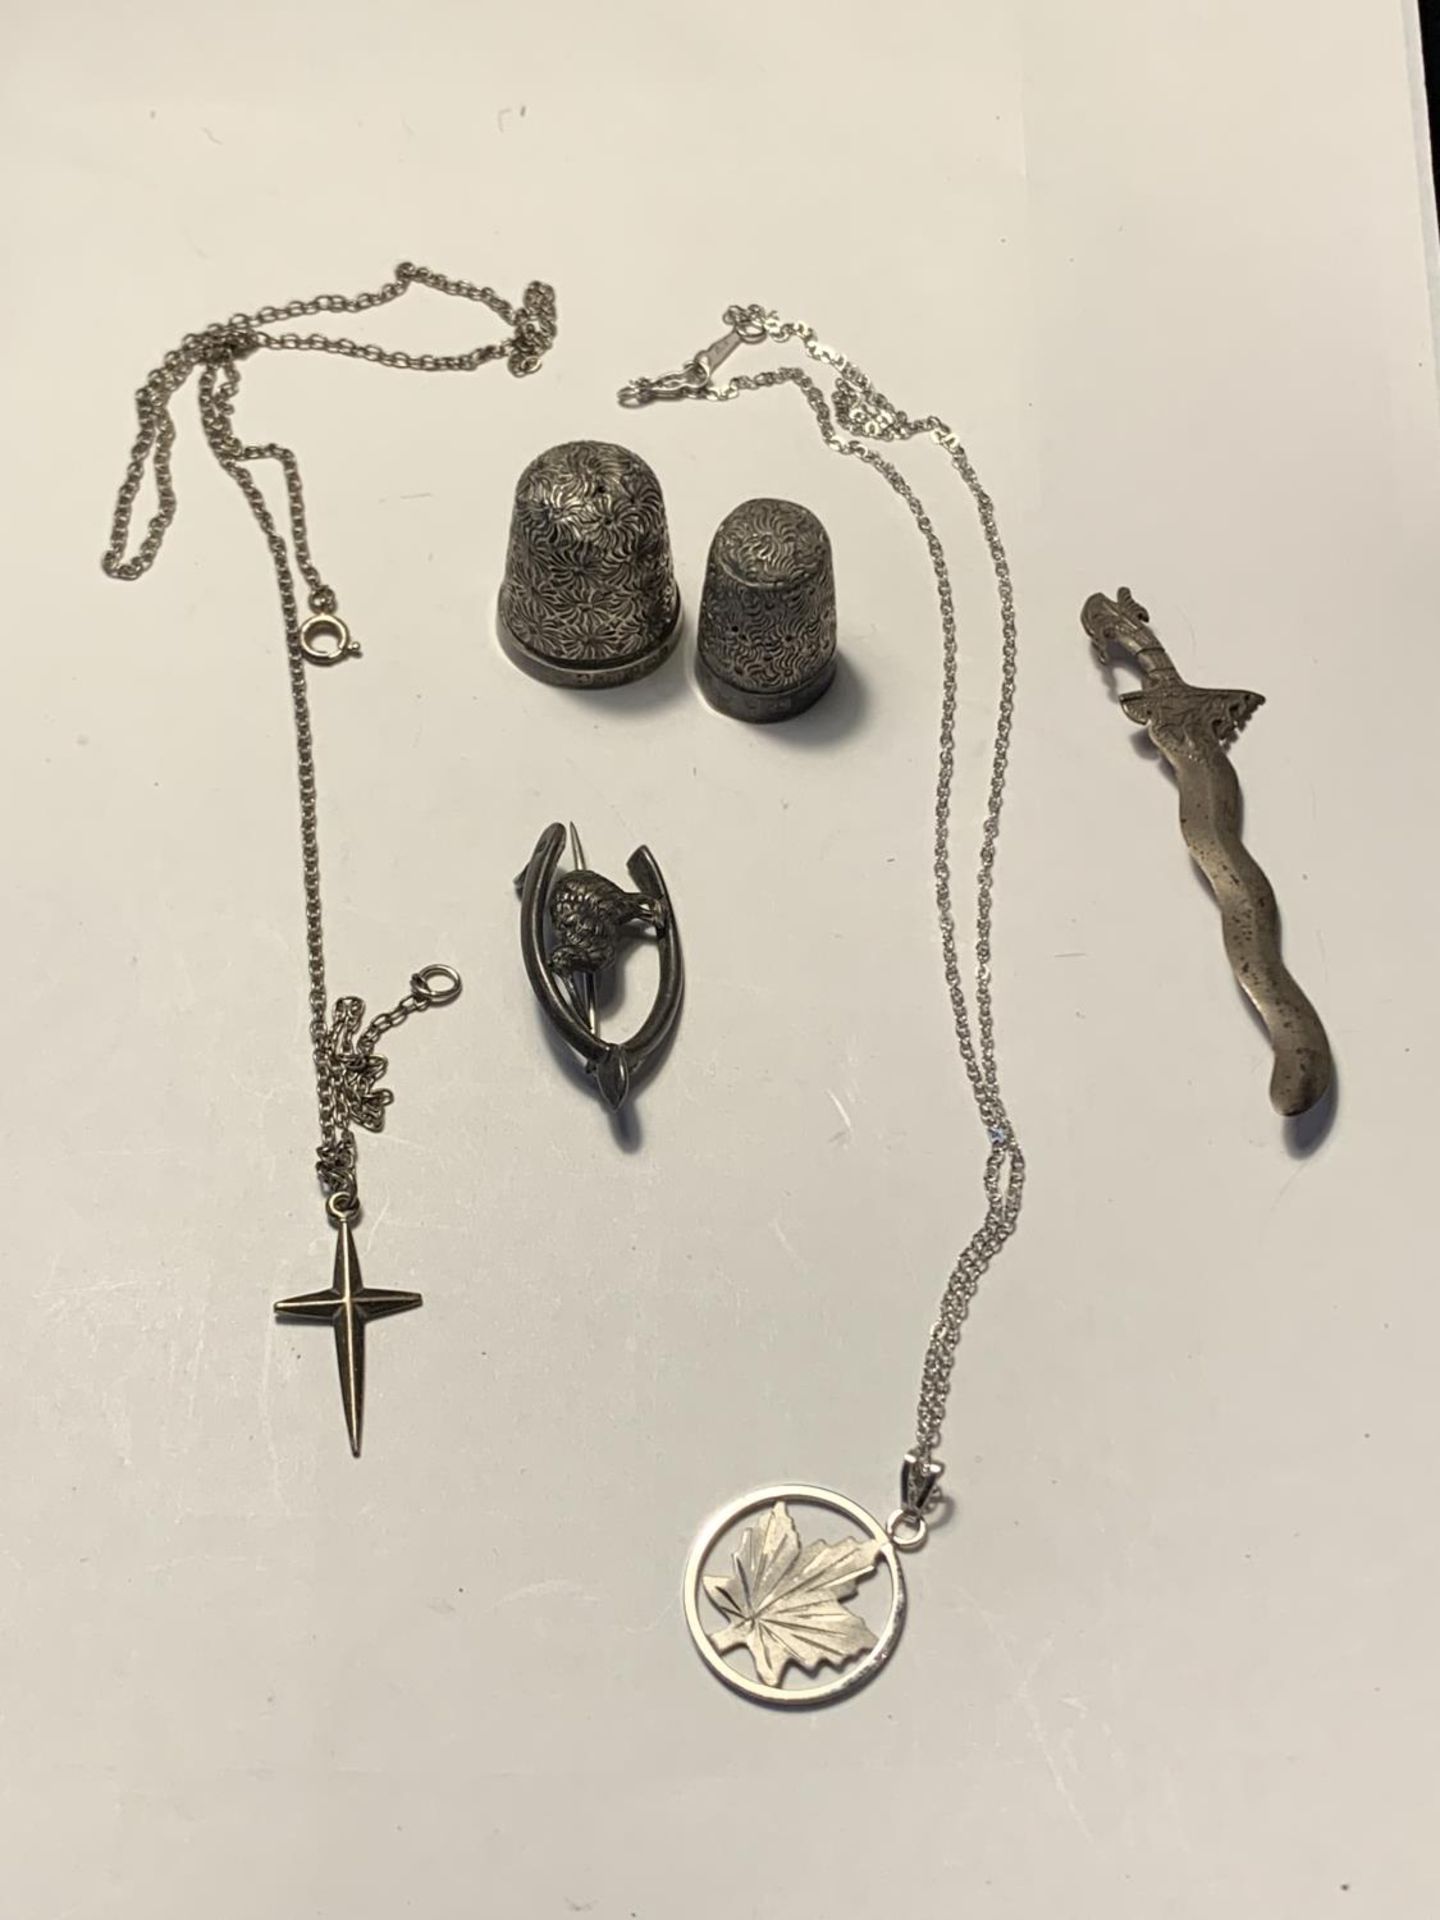 SIX ITEMS OF SILVER TO INCLUDE TWO THIMBLES, TWO BROOCHES AND TWO NECKLACES WITH PENDANTS